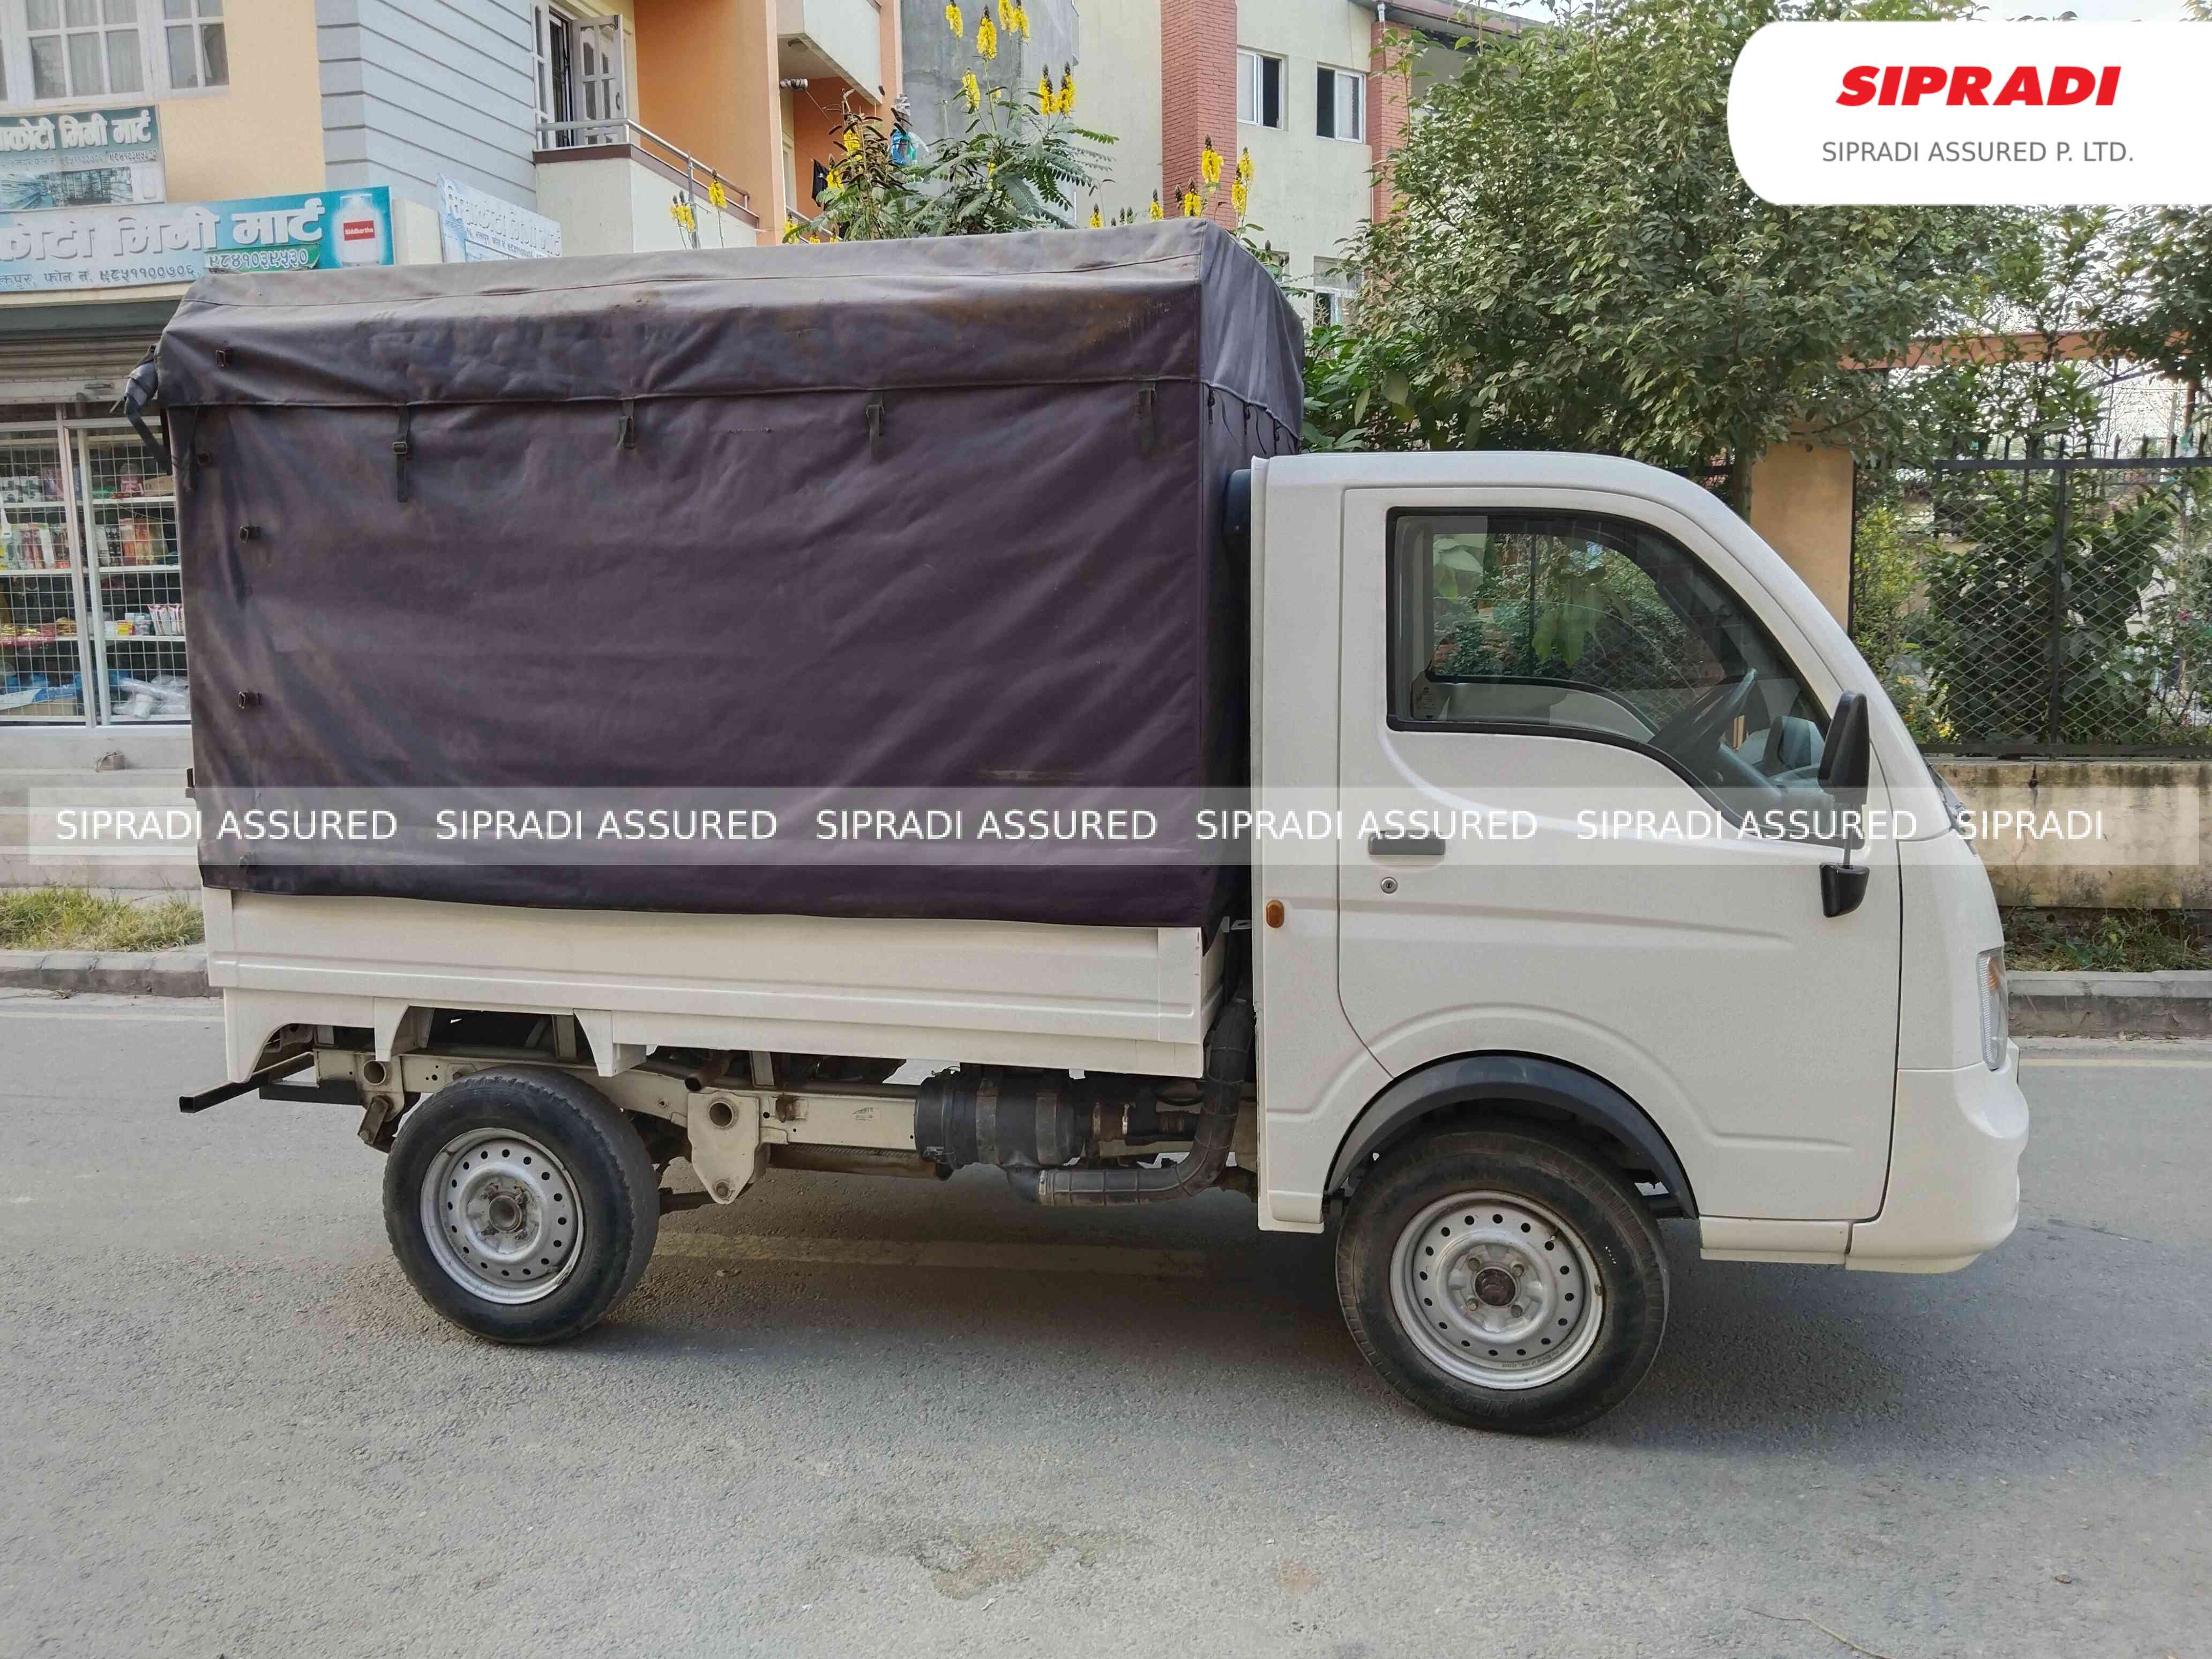 Buy second hand TATA ACE in low price 